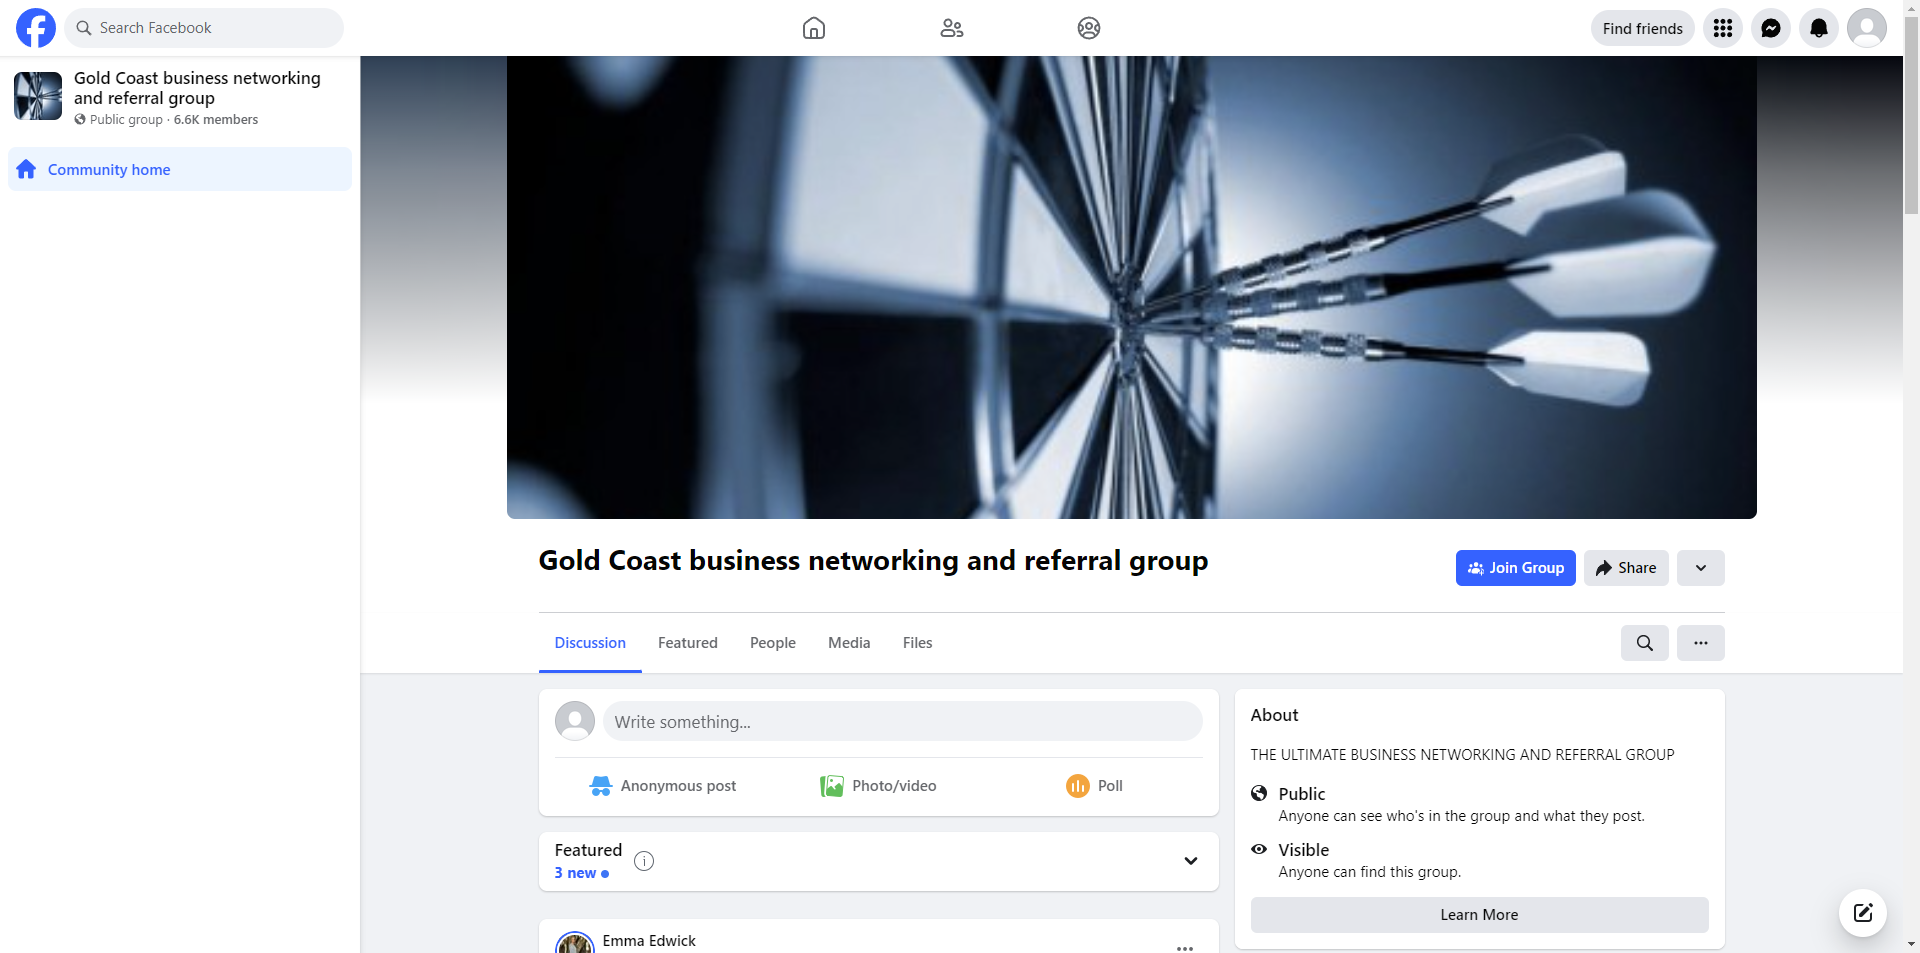 Gold Coast Business Networking and Referral Group